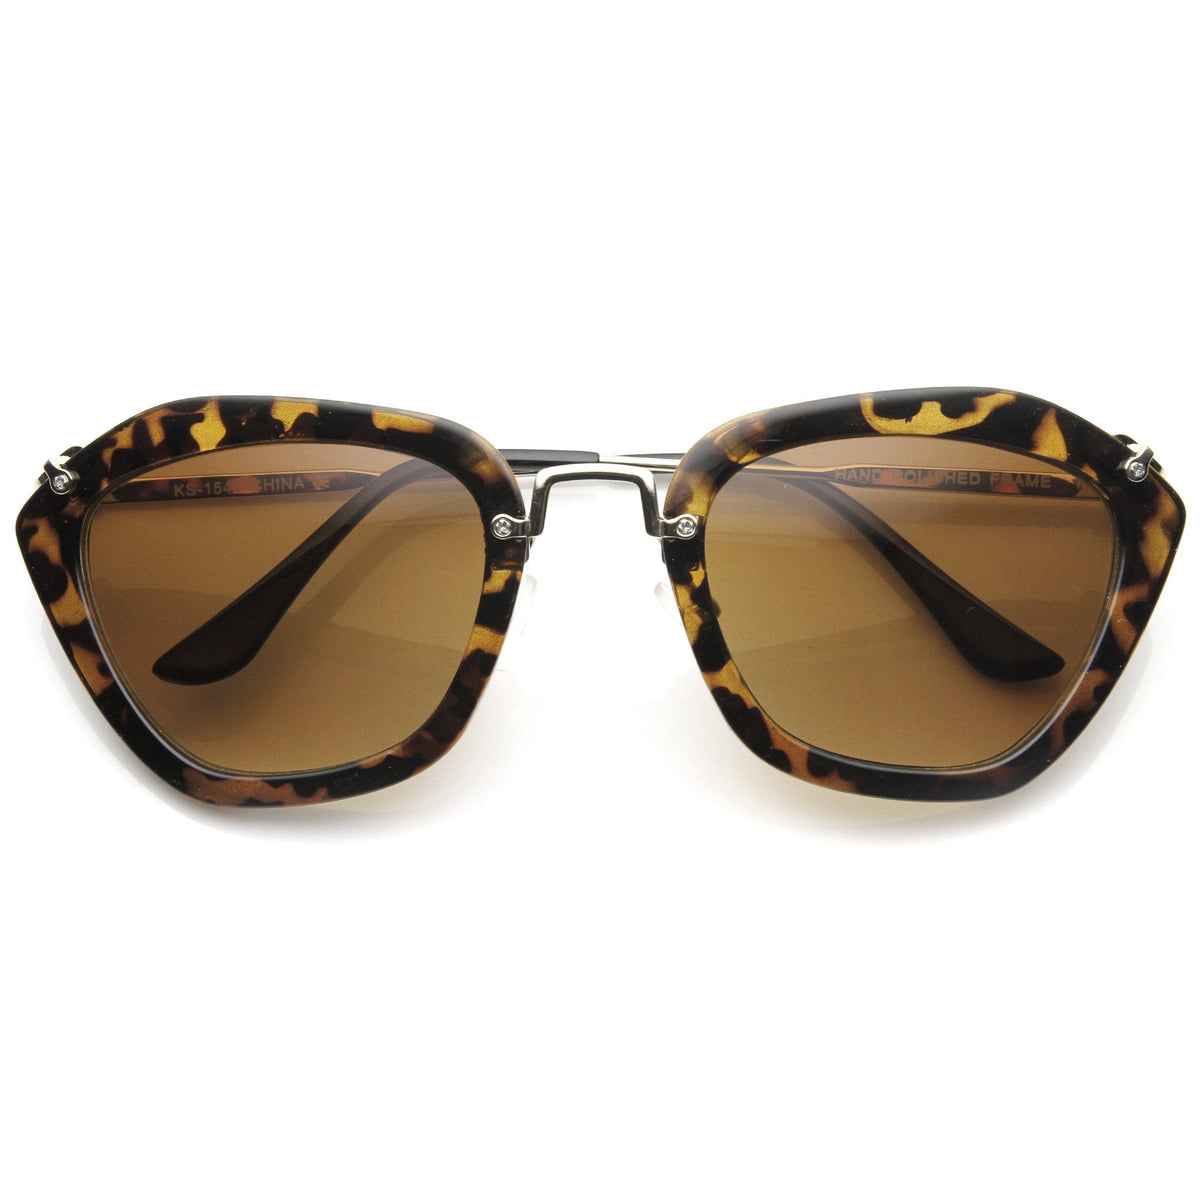 Fashion Hexagon Frame With Metal Accents Sunglasses - zeroUV